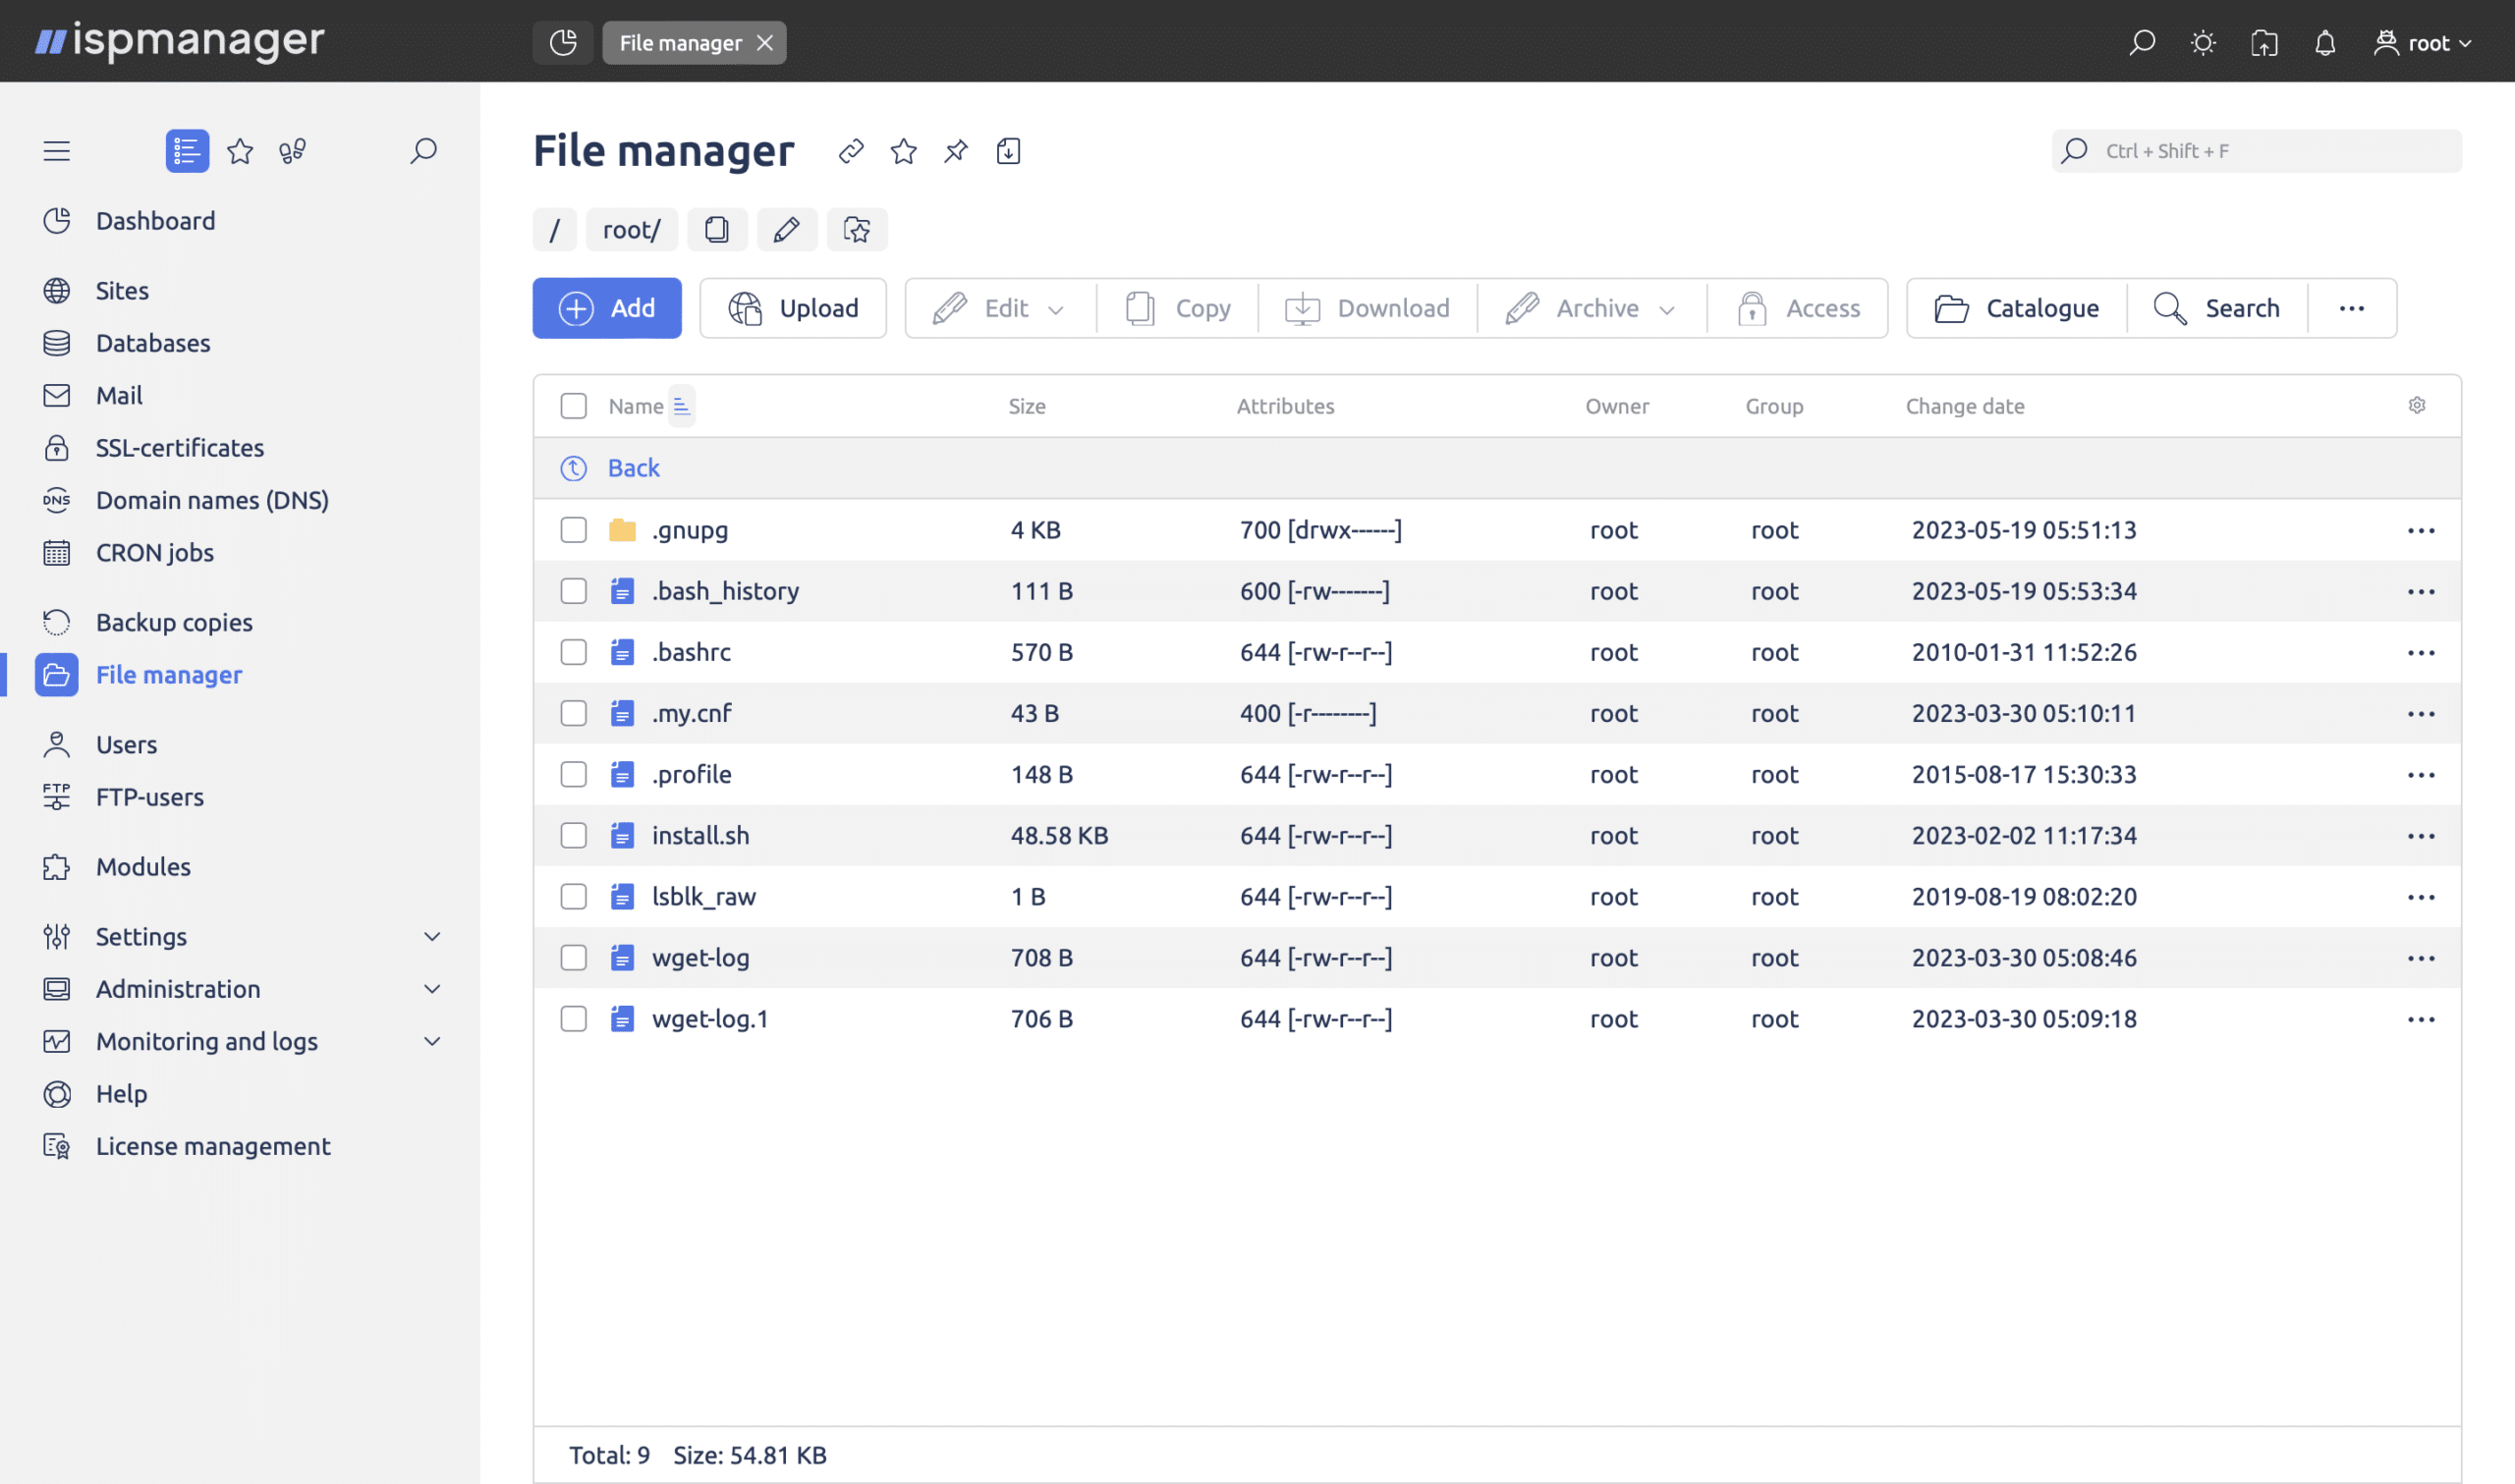 ISPmanager - file managers